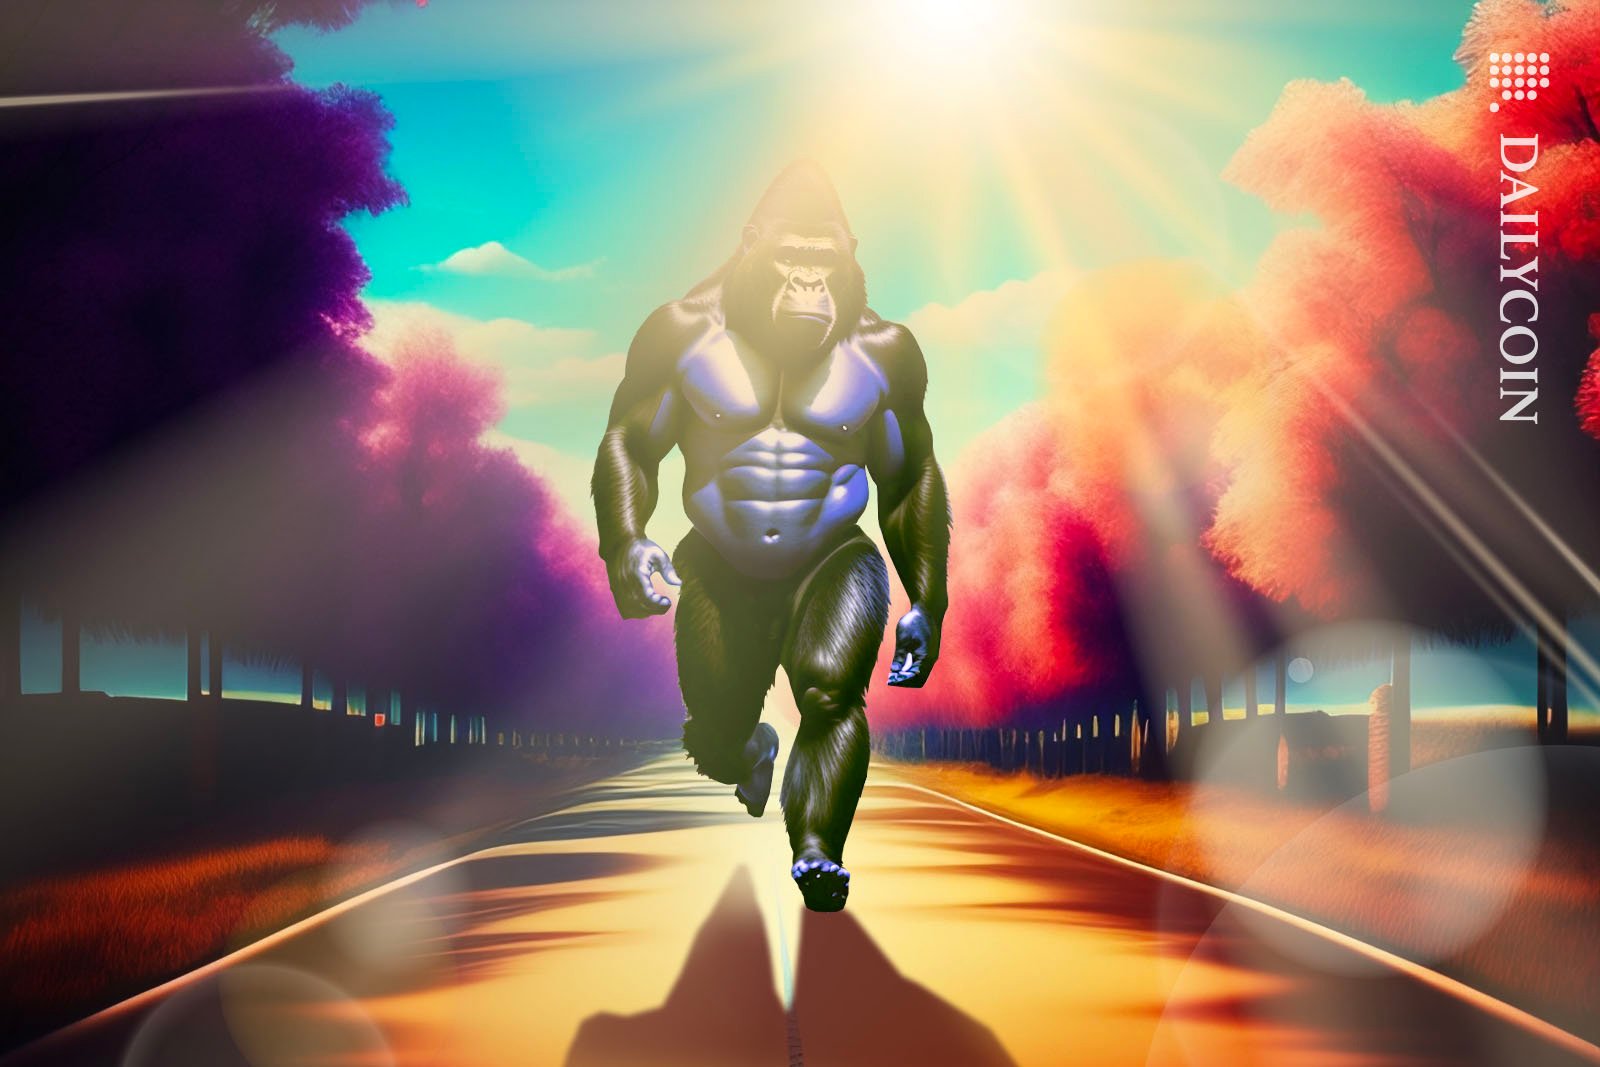 Big dominant gorilla approaching the camera on a sun baked, tree lined road.